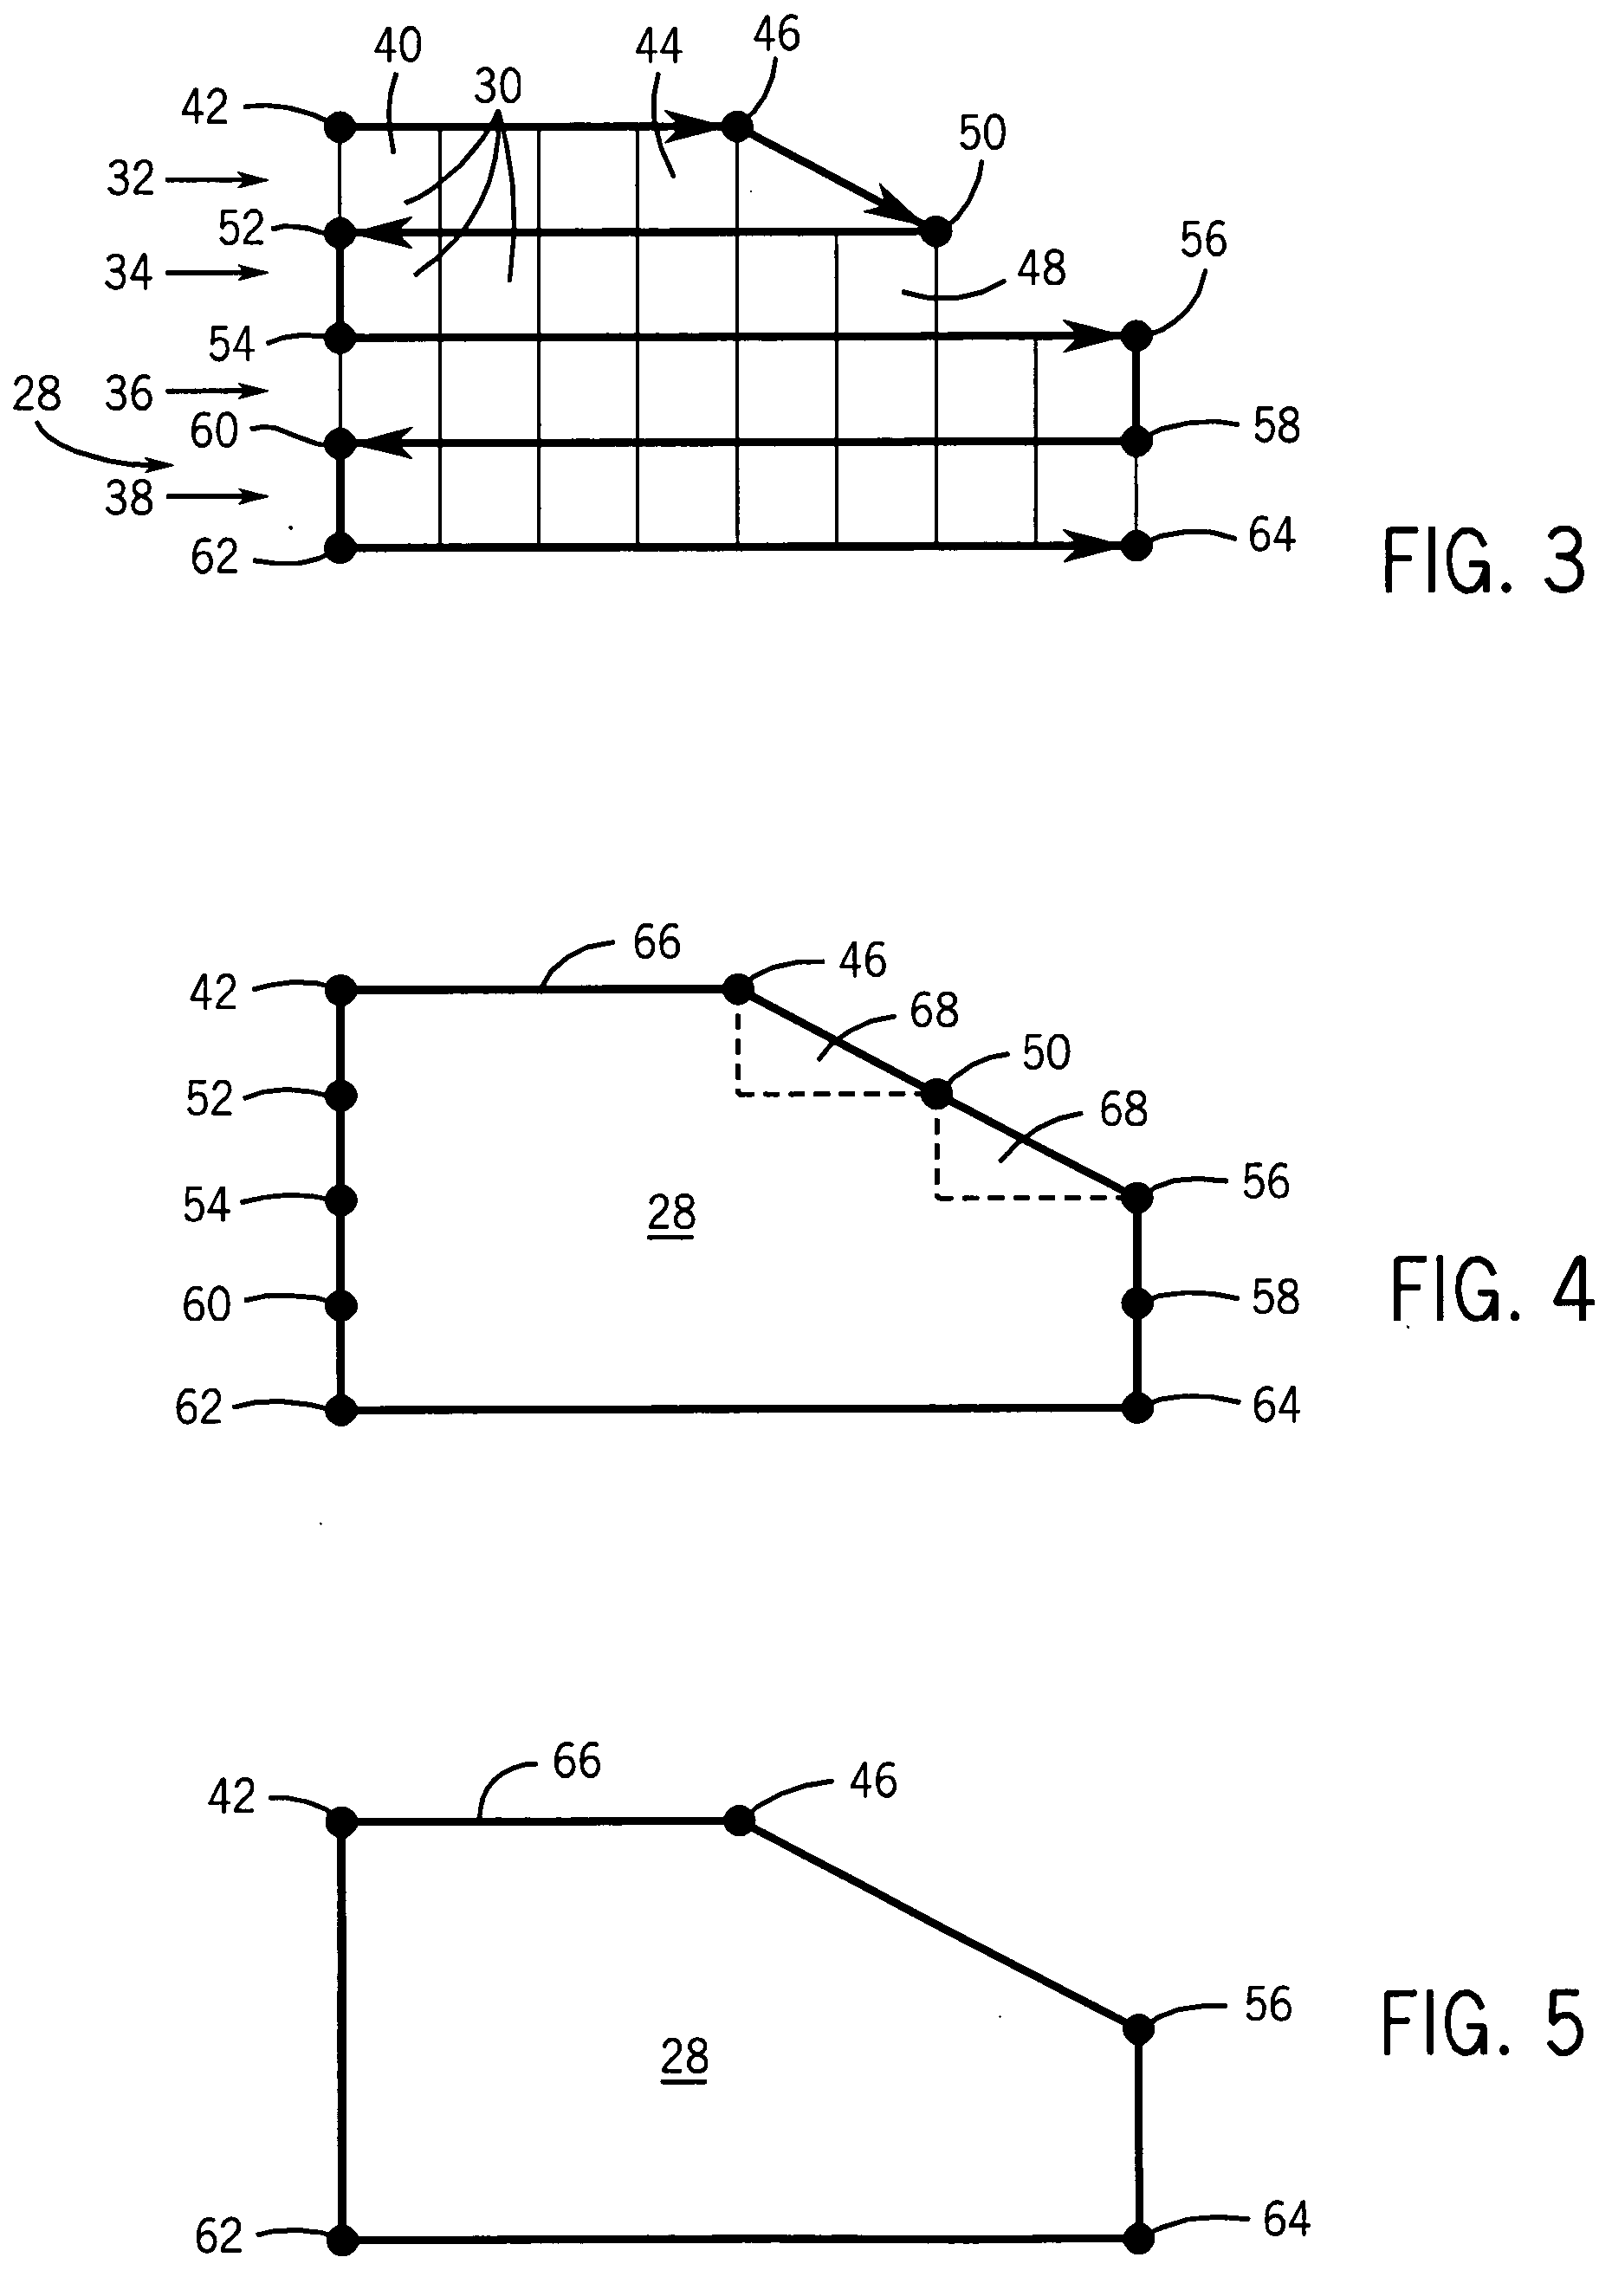 Method and system for generating polygonal boundary definitions for image objects